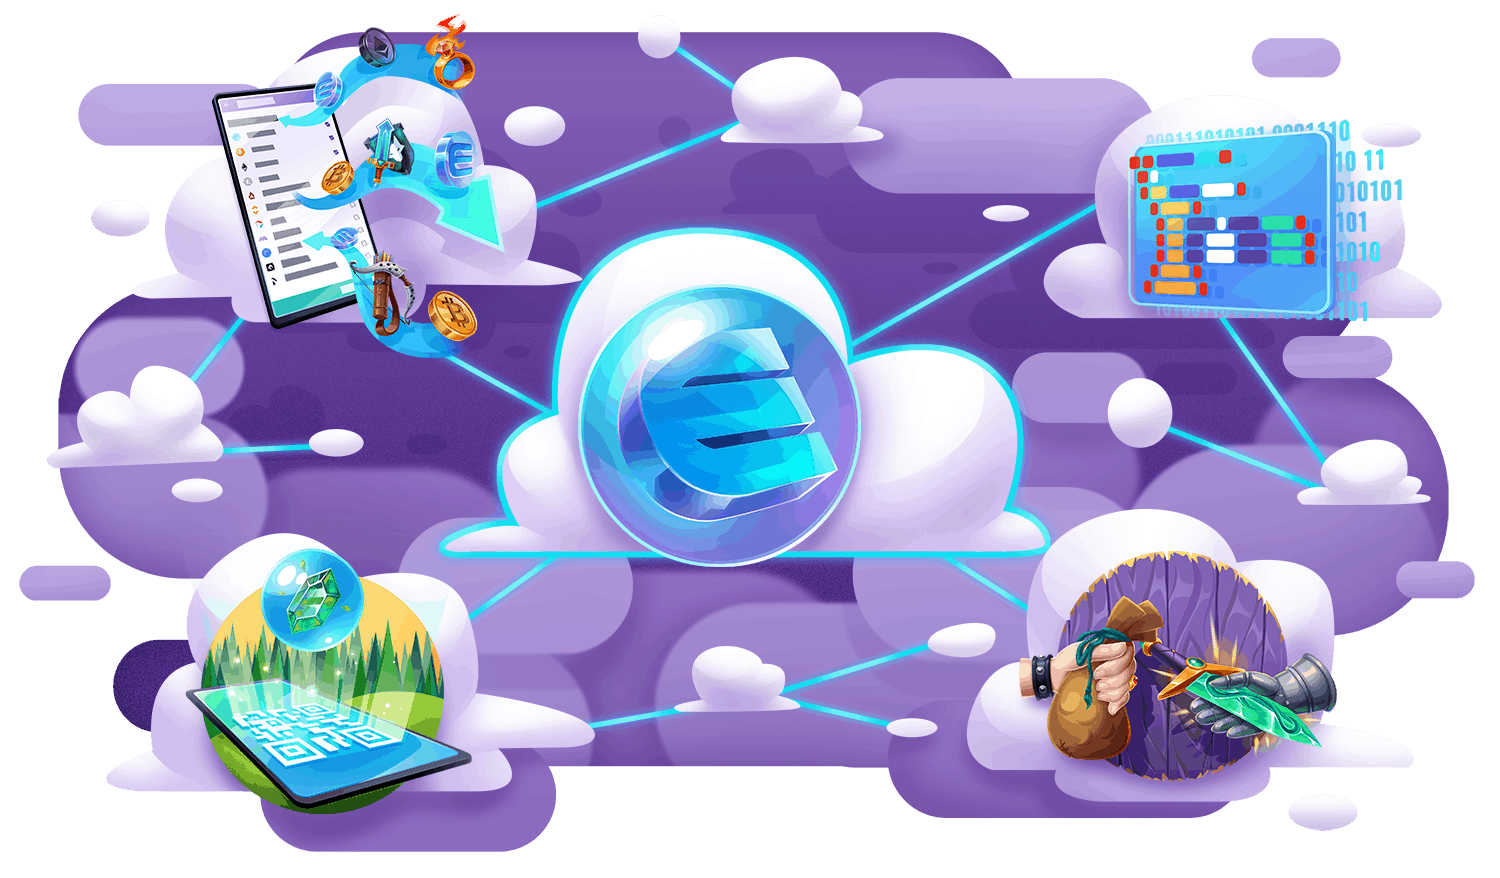 5e947d0ea6915dd2ff471b55 Enjin Ecosystem Illustration 1 Multiverse Items are Blockchain assets (ERC-1155 tokens) that can be used across multiple games.